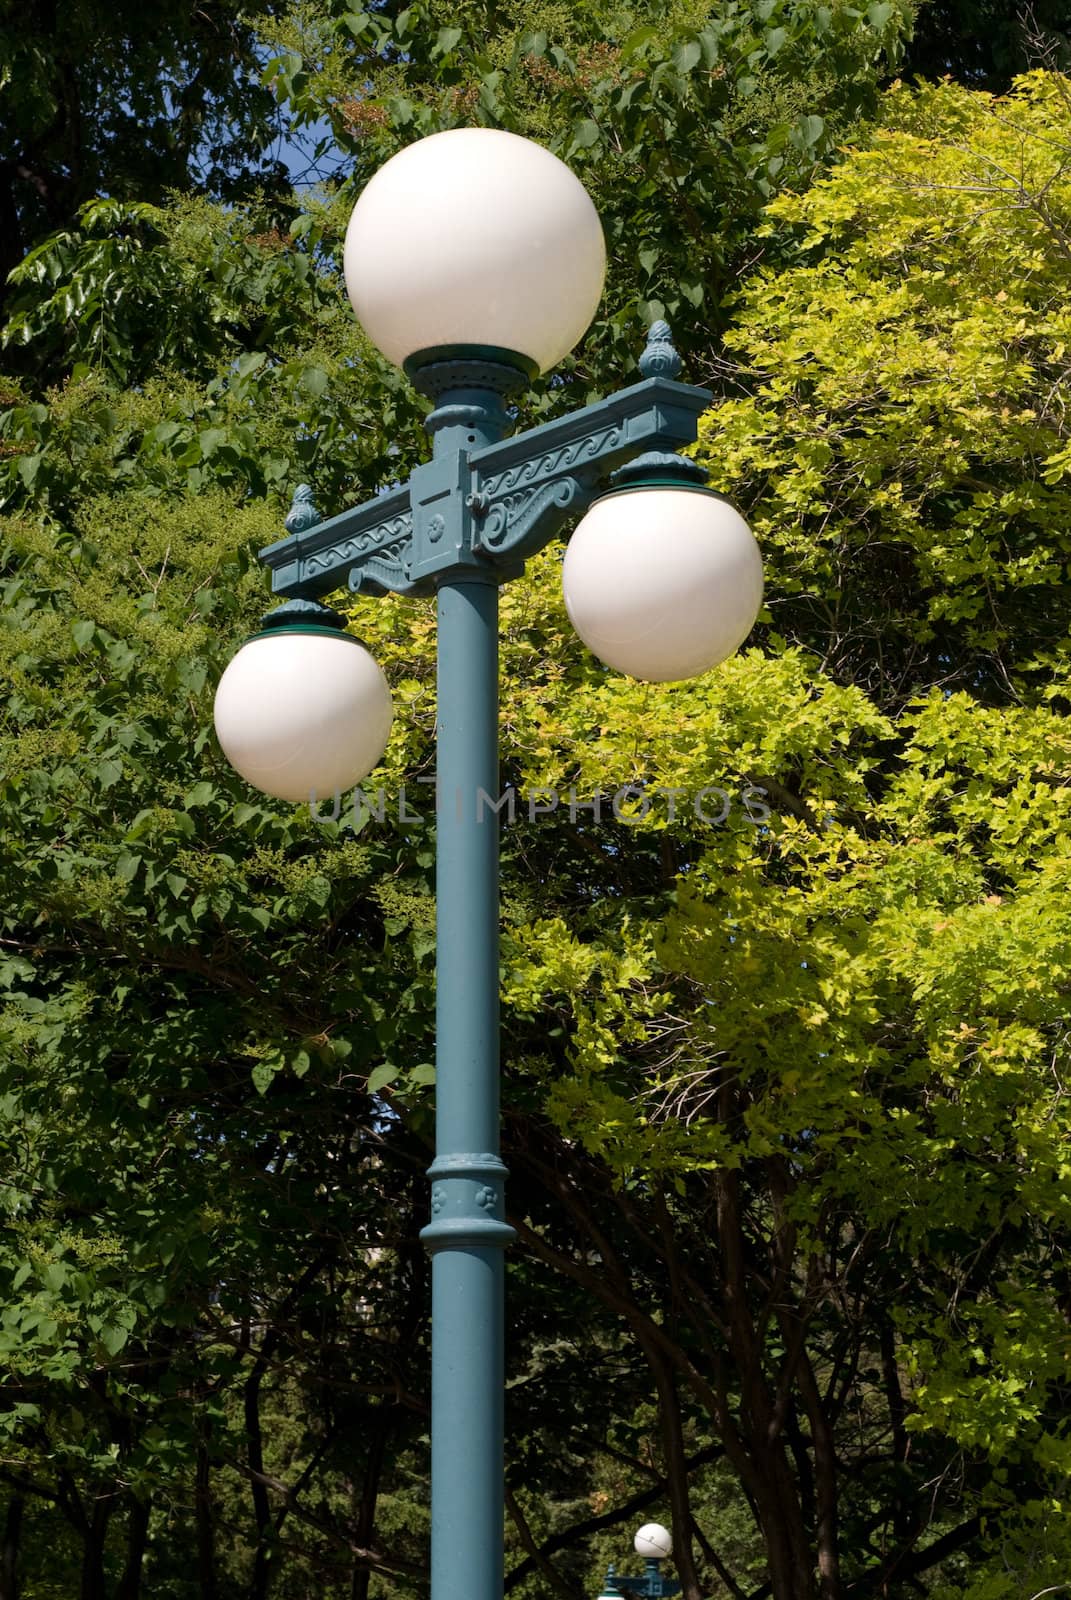 A lamp post with three lights on it shot against a green tree